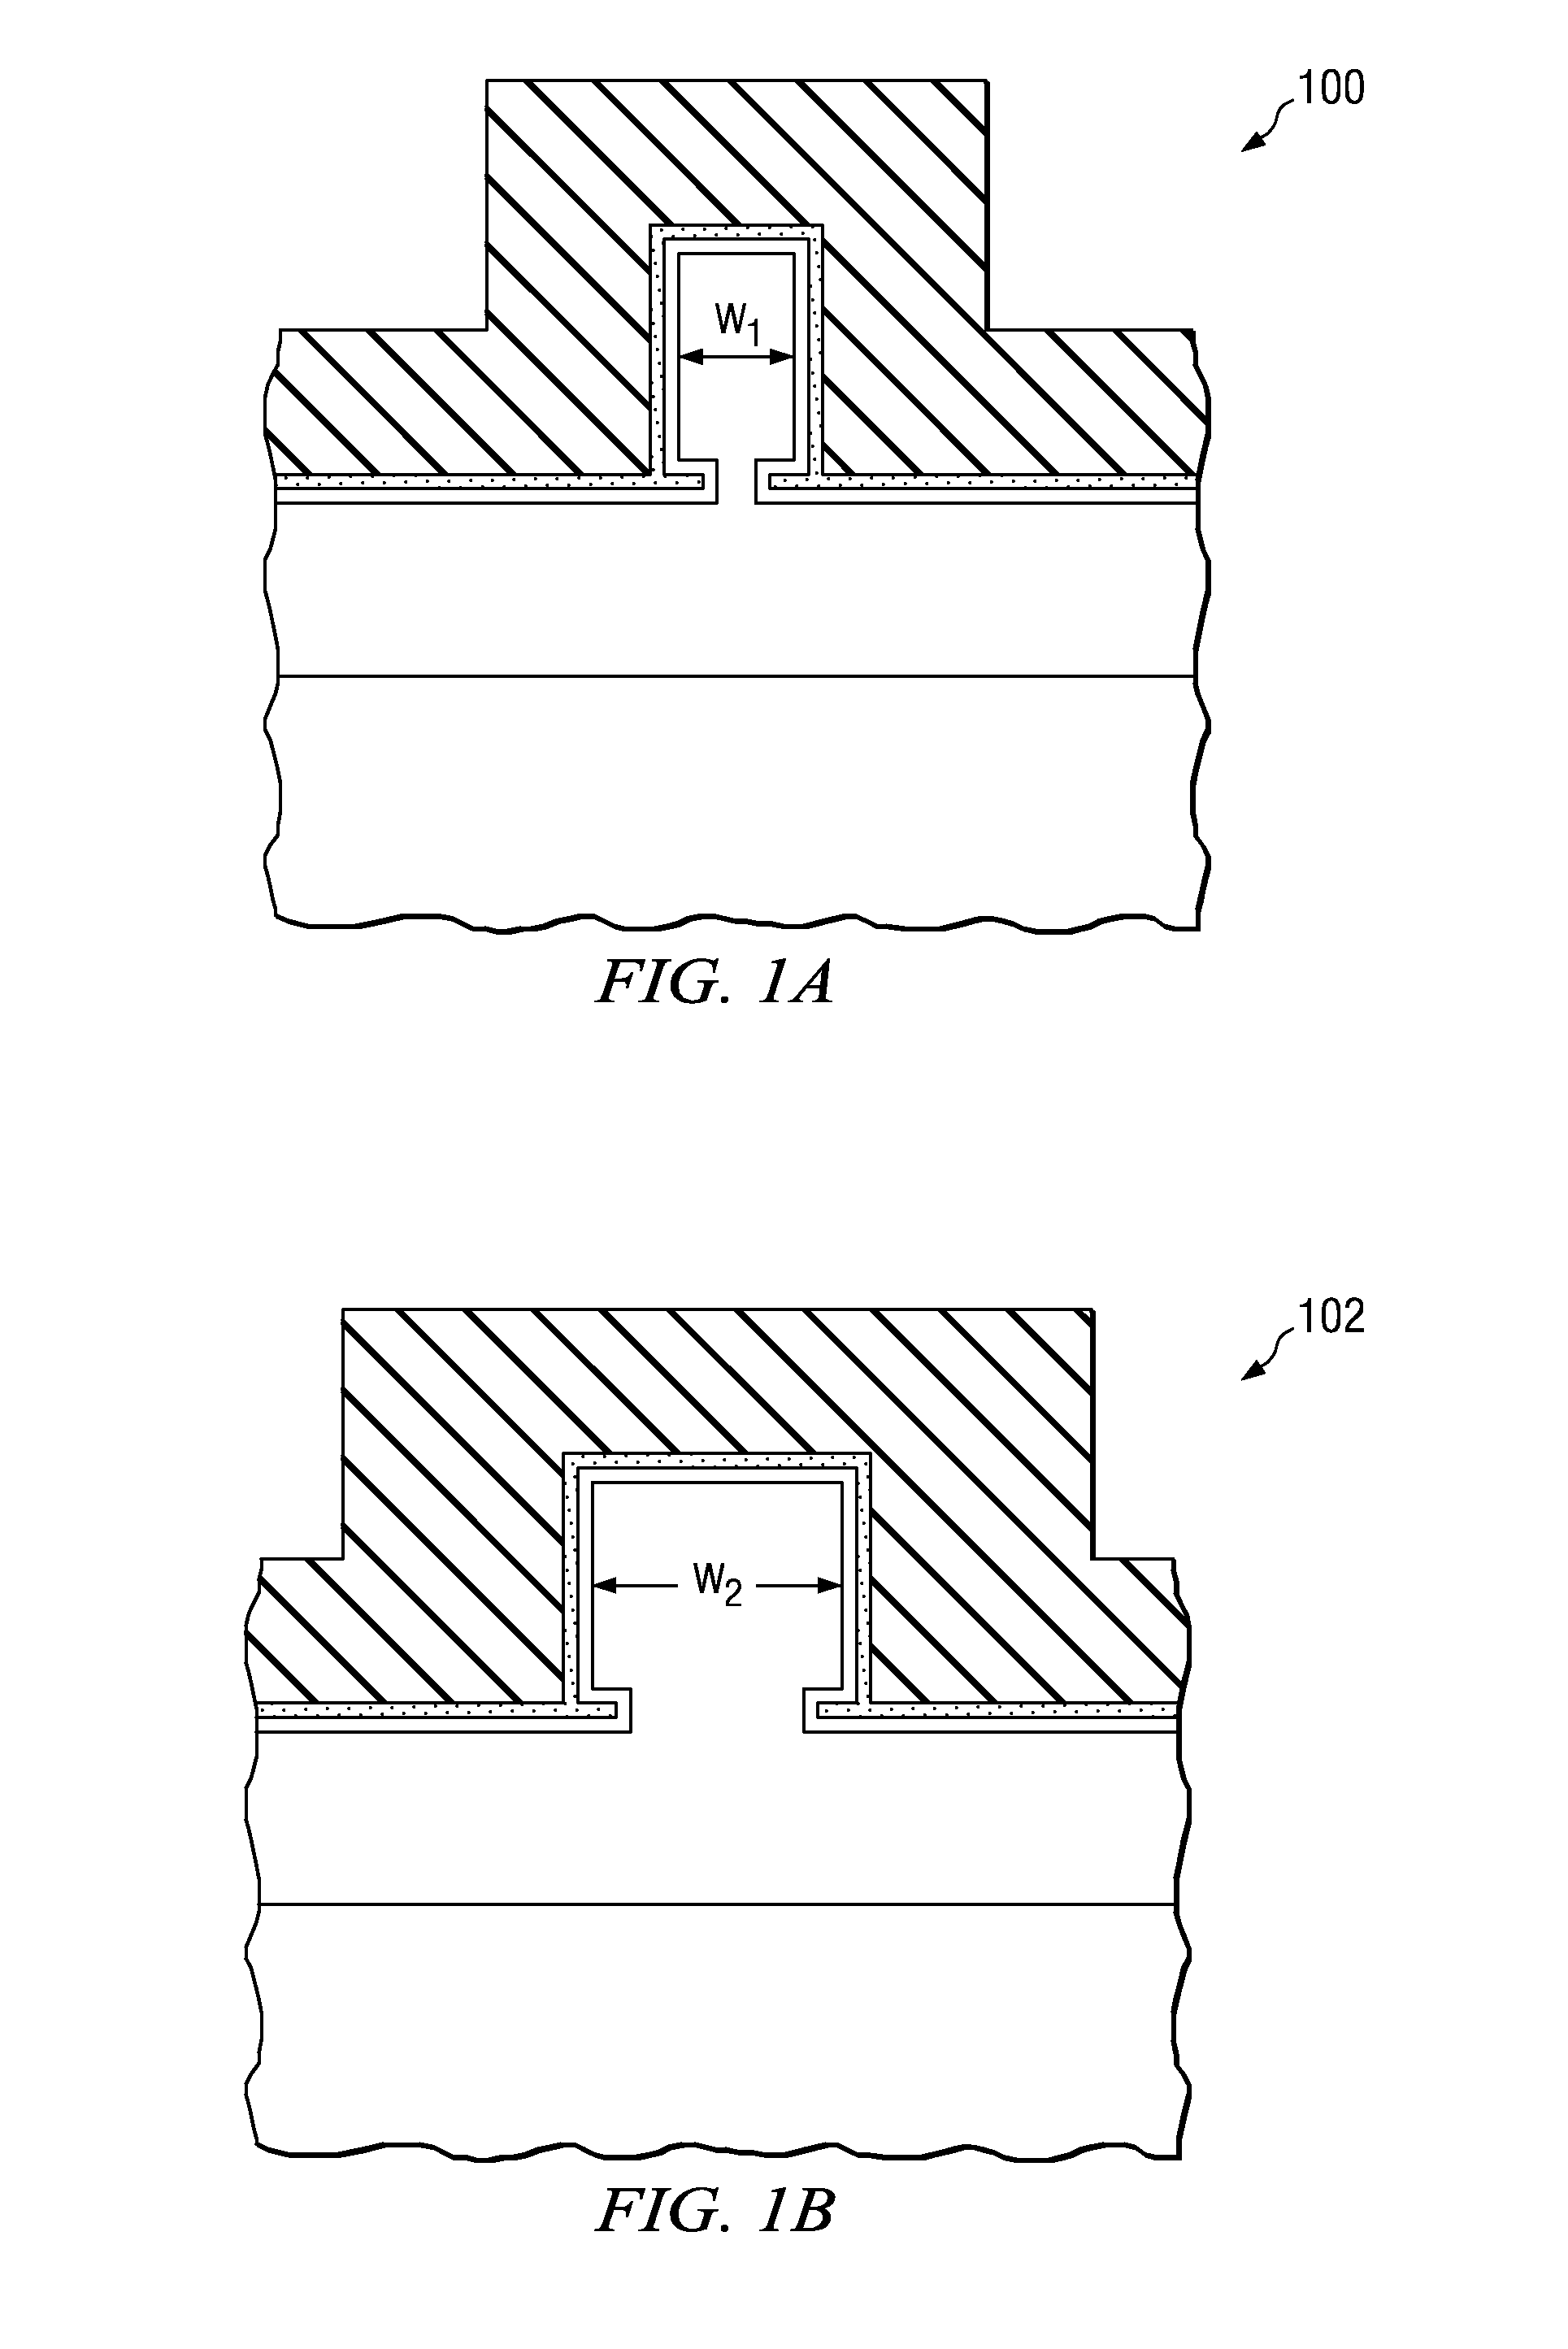 Varying mugfet width to adjust device characteristics